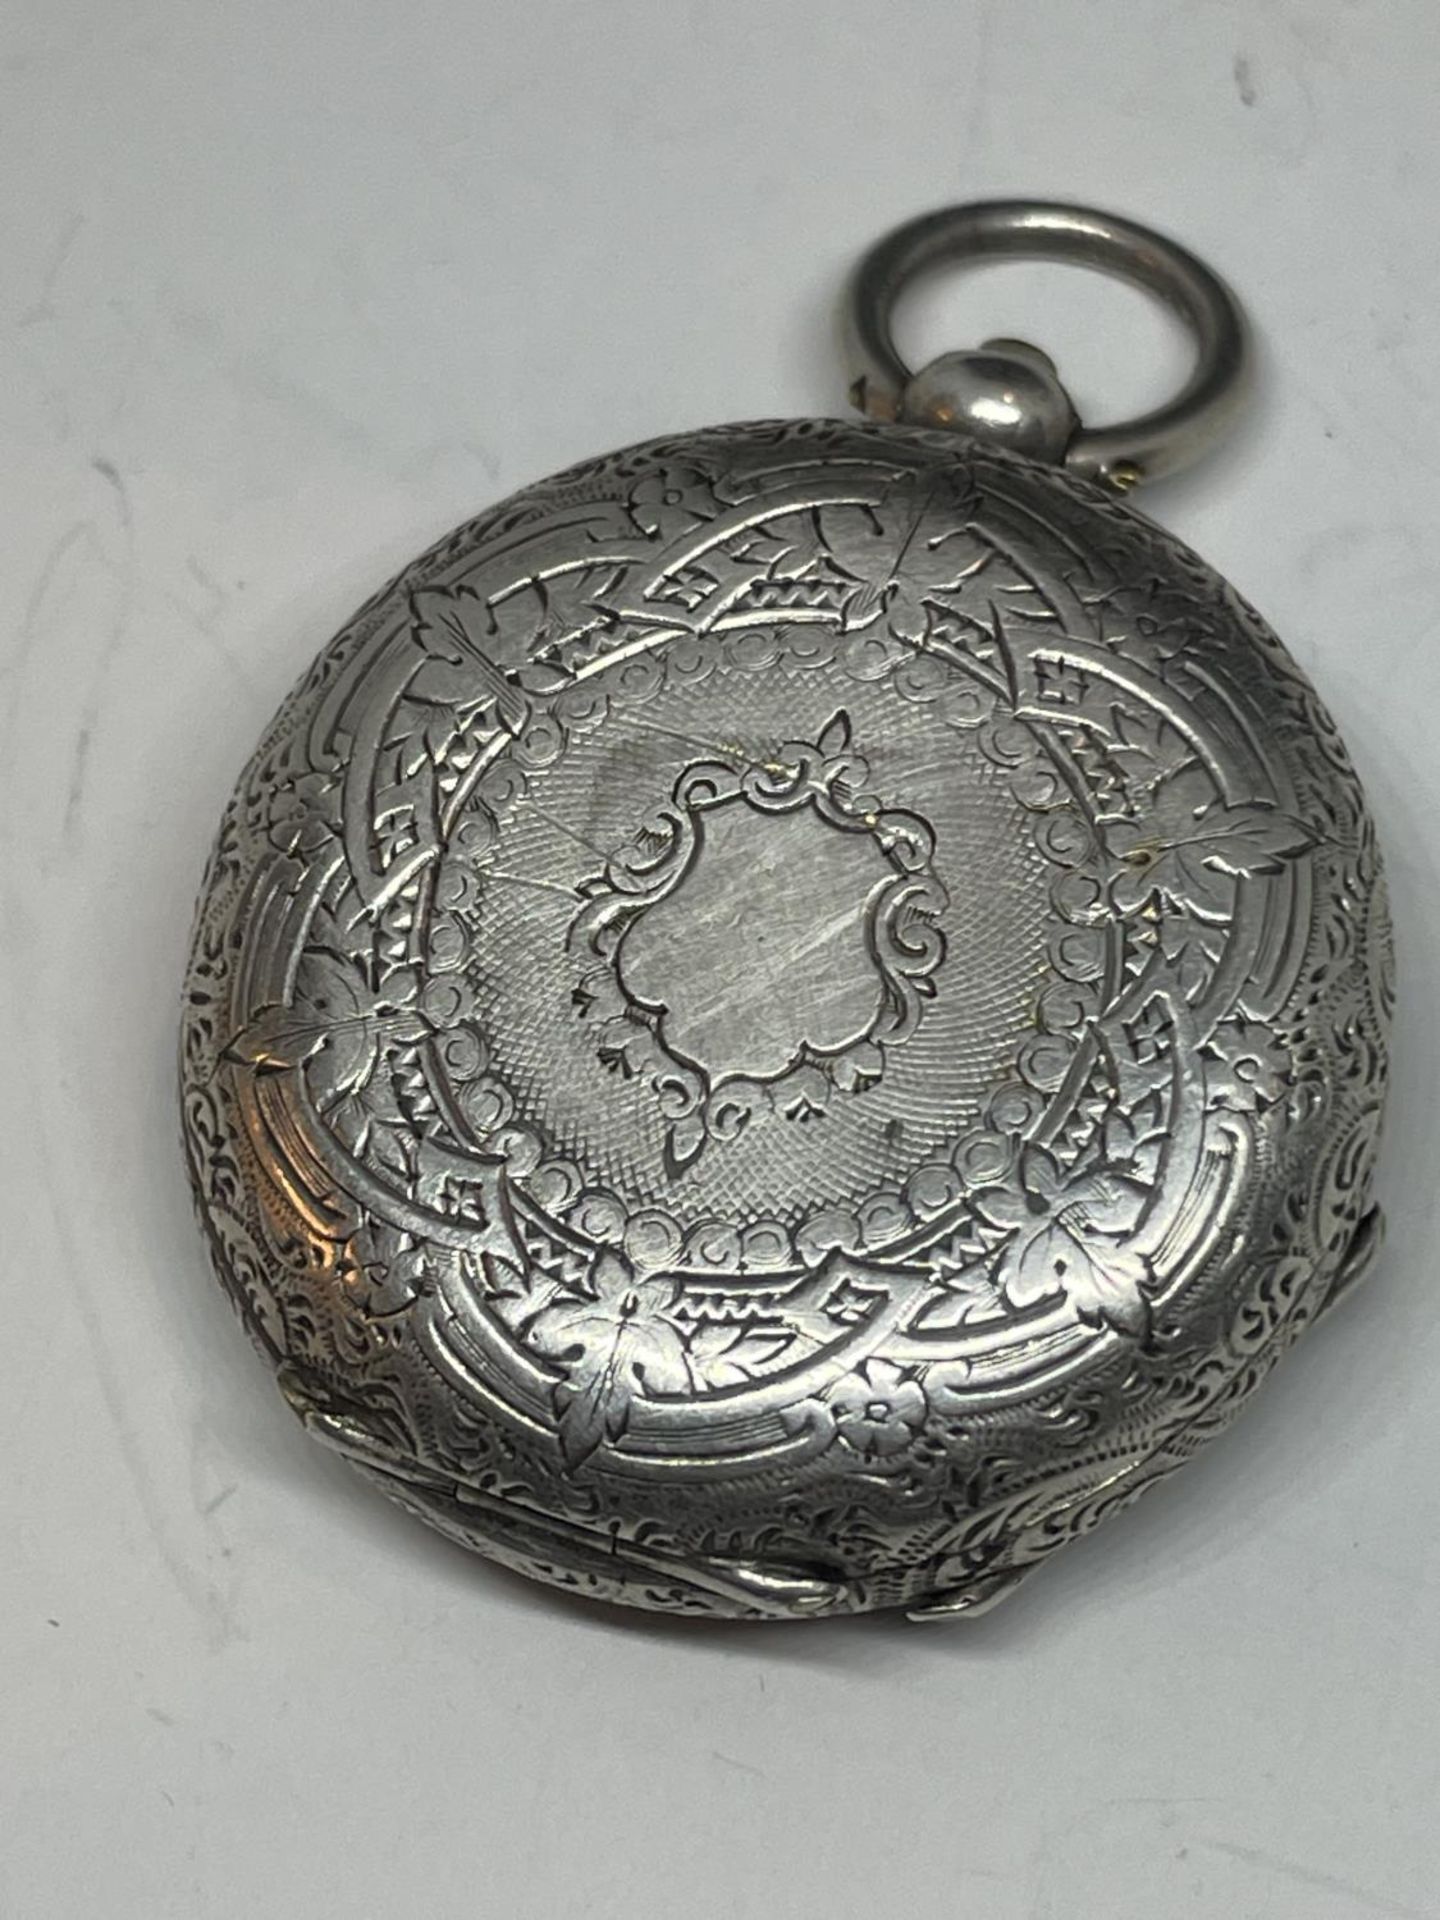 AN ORNATE LADIES SILVER POCKET WATCH - Image 2 of 3